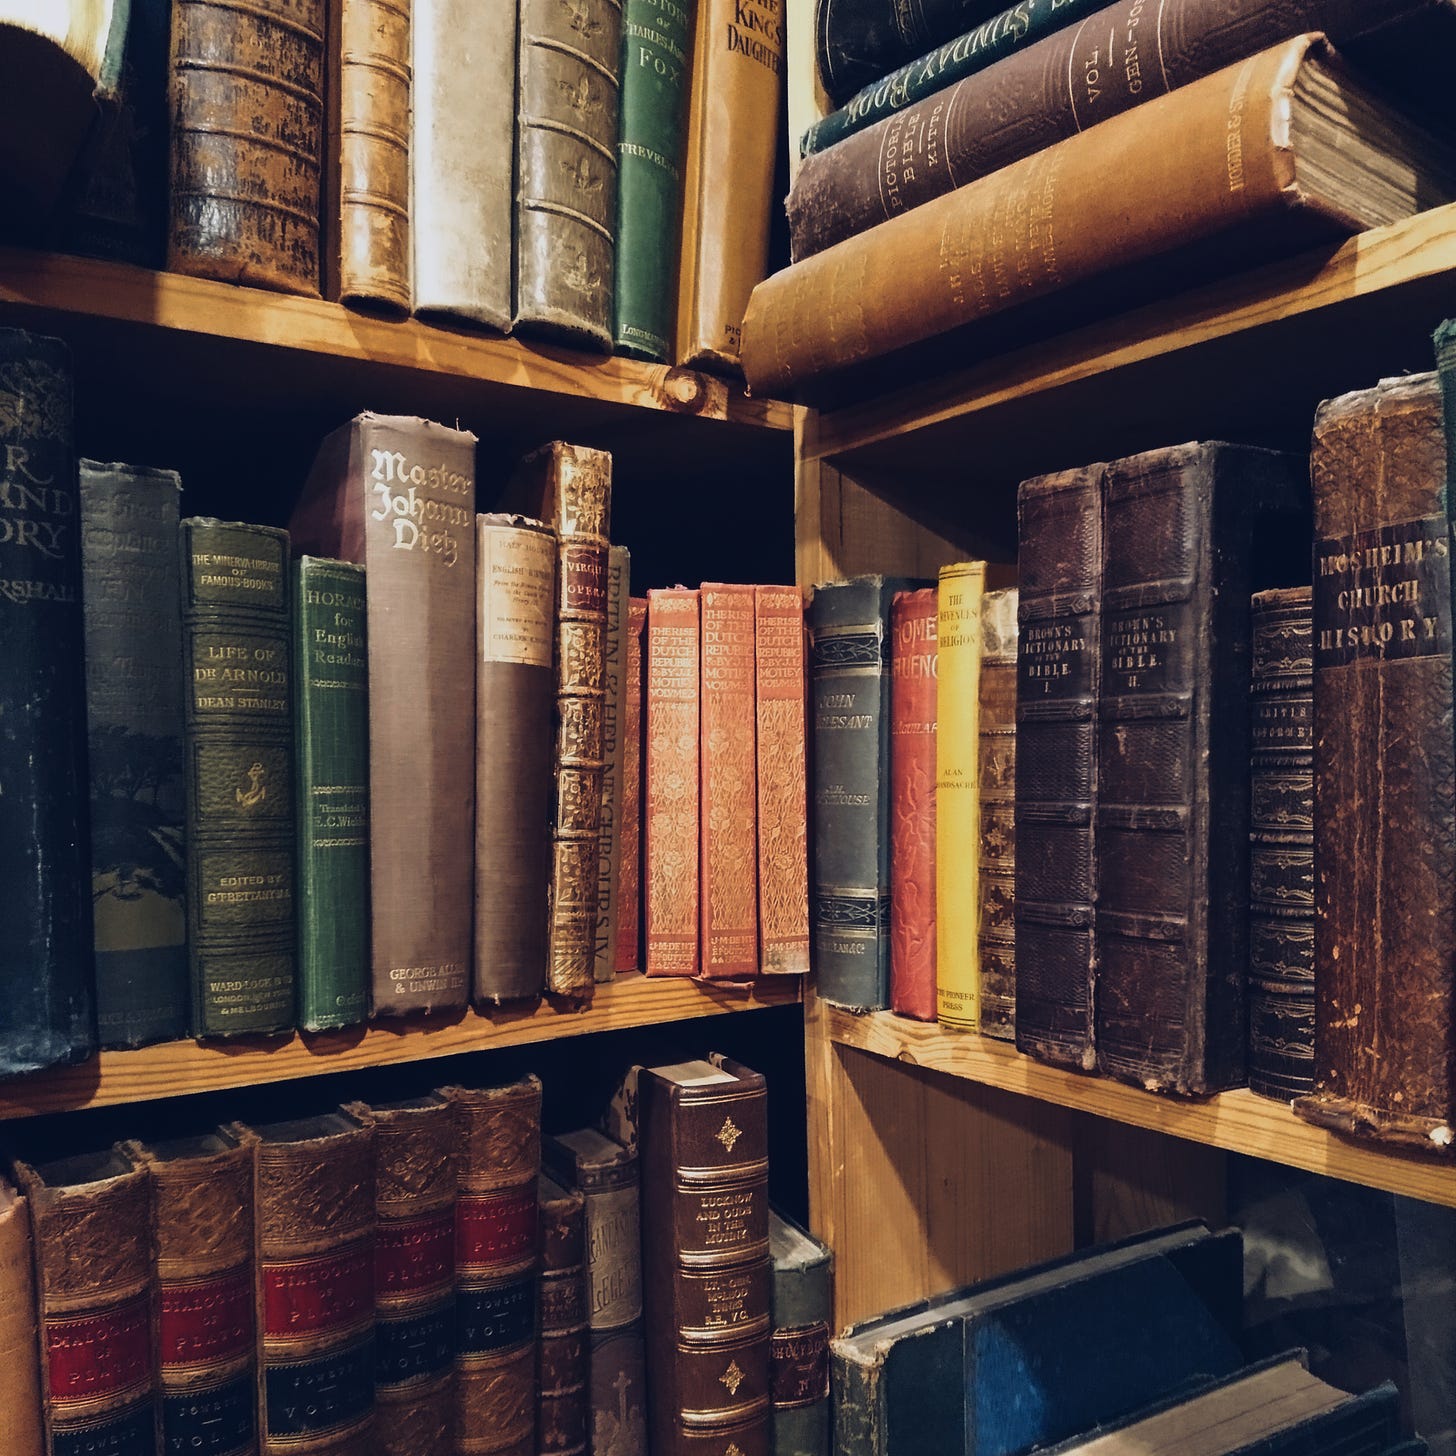 Shelves of old leather-bound books